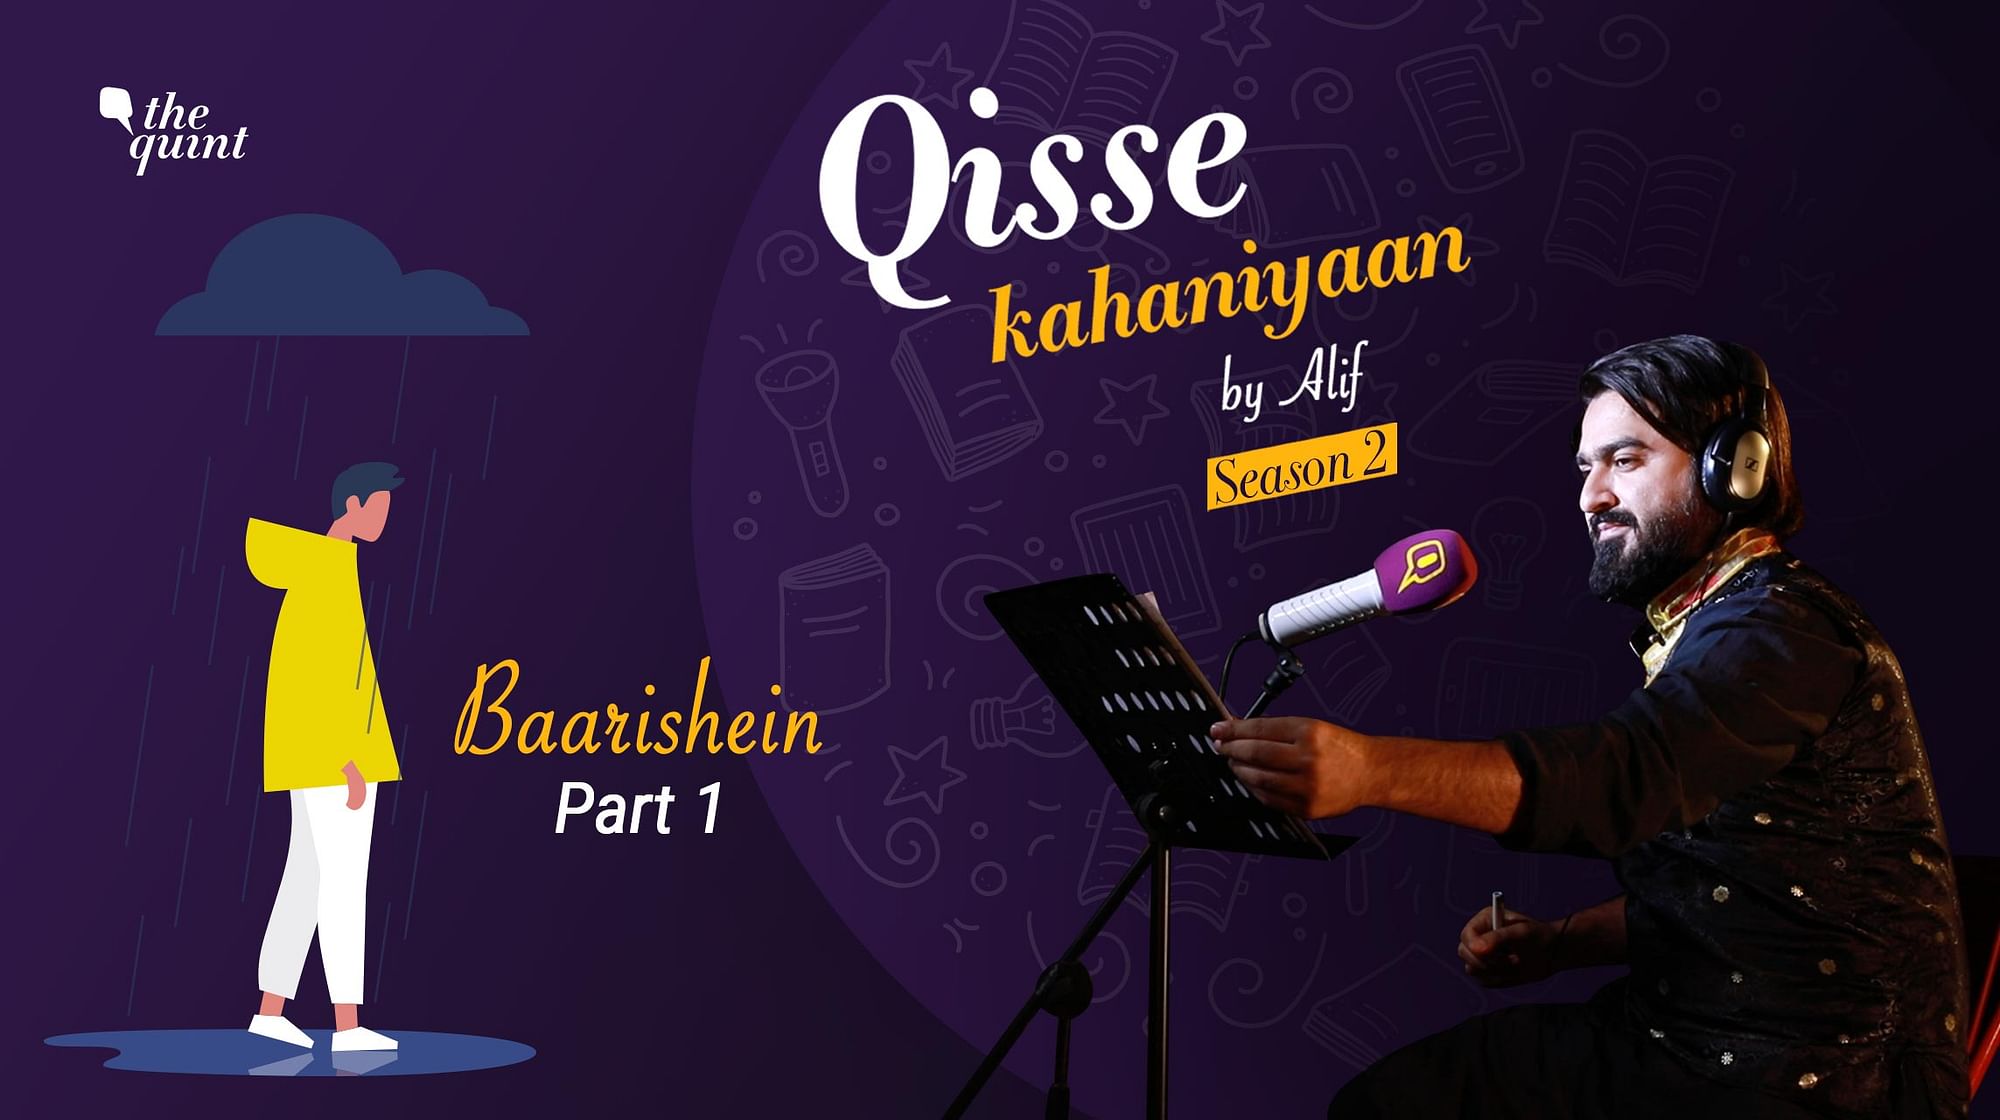 <div class="paragraphs"><p><strong>Qisse Kahaniyaan by Alif</strong> is back with a new season, new characters and new stories on love and nostalgia.</p></div>